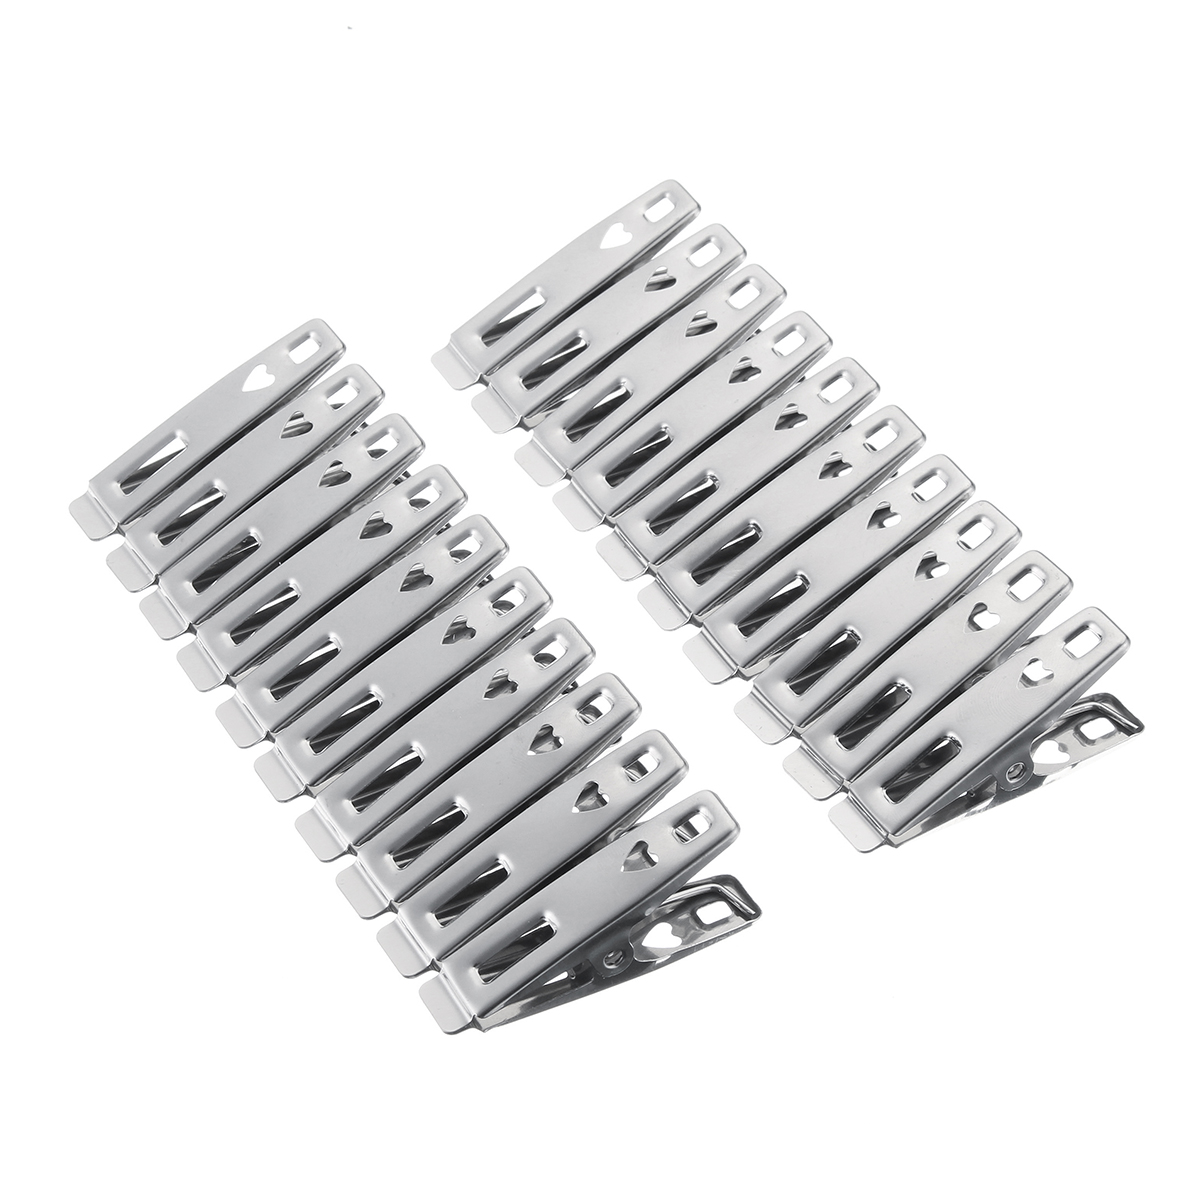 

20Pcs Stainless Steel Clothes Pegs Hanging Pins Laundry Household Clamps Clamping Tools